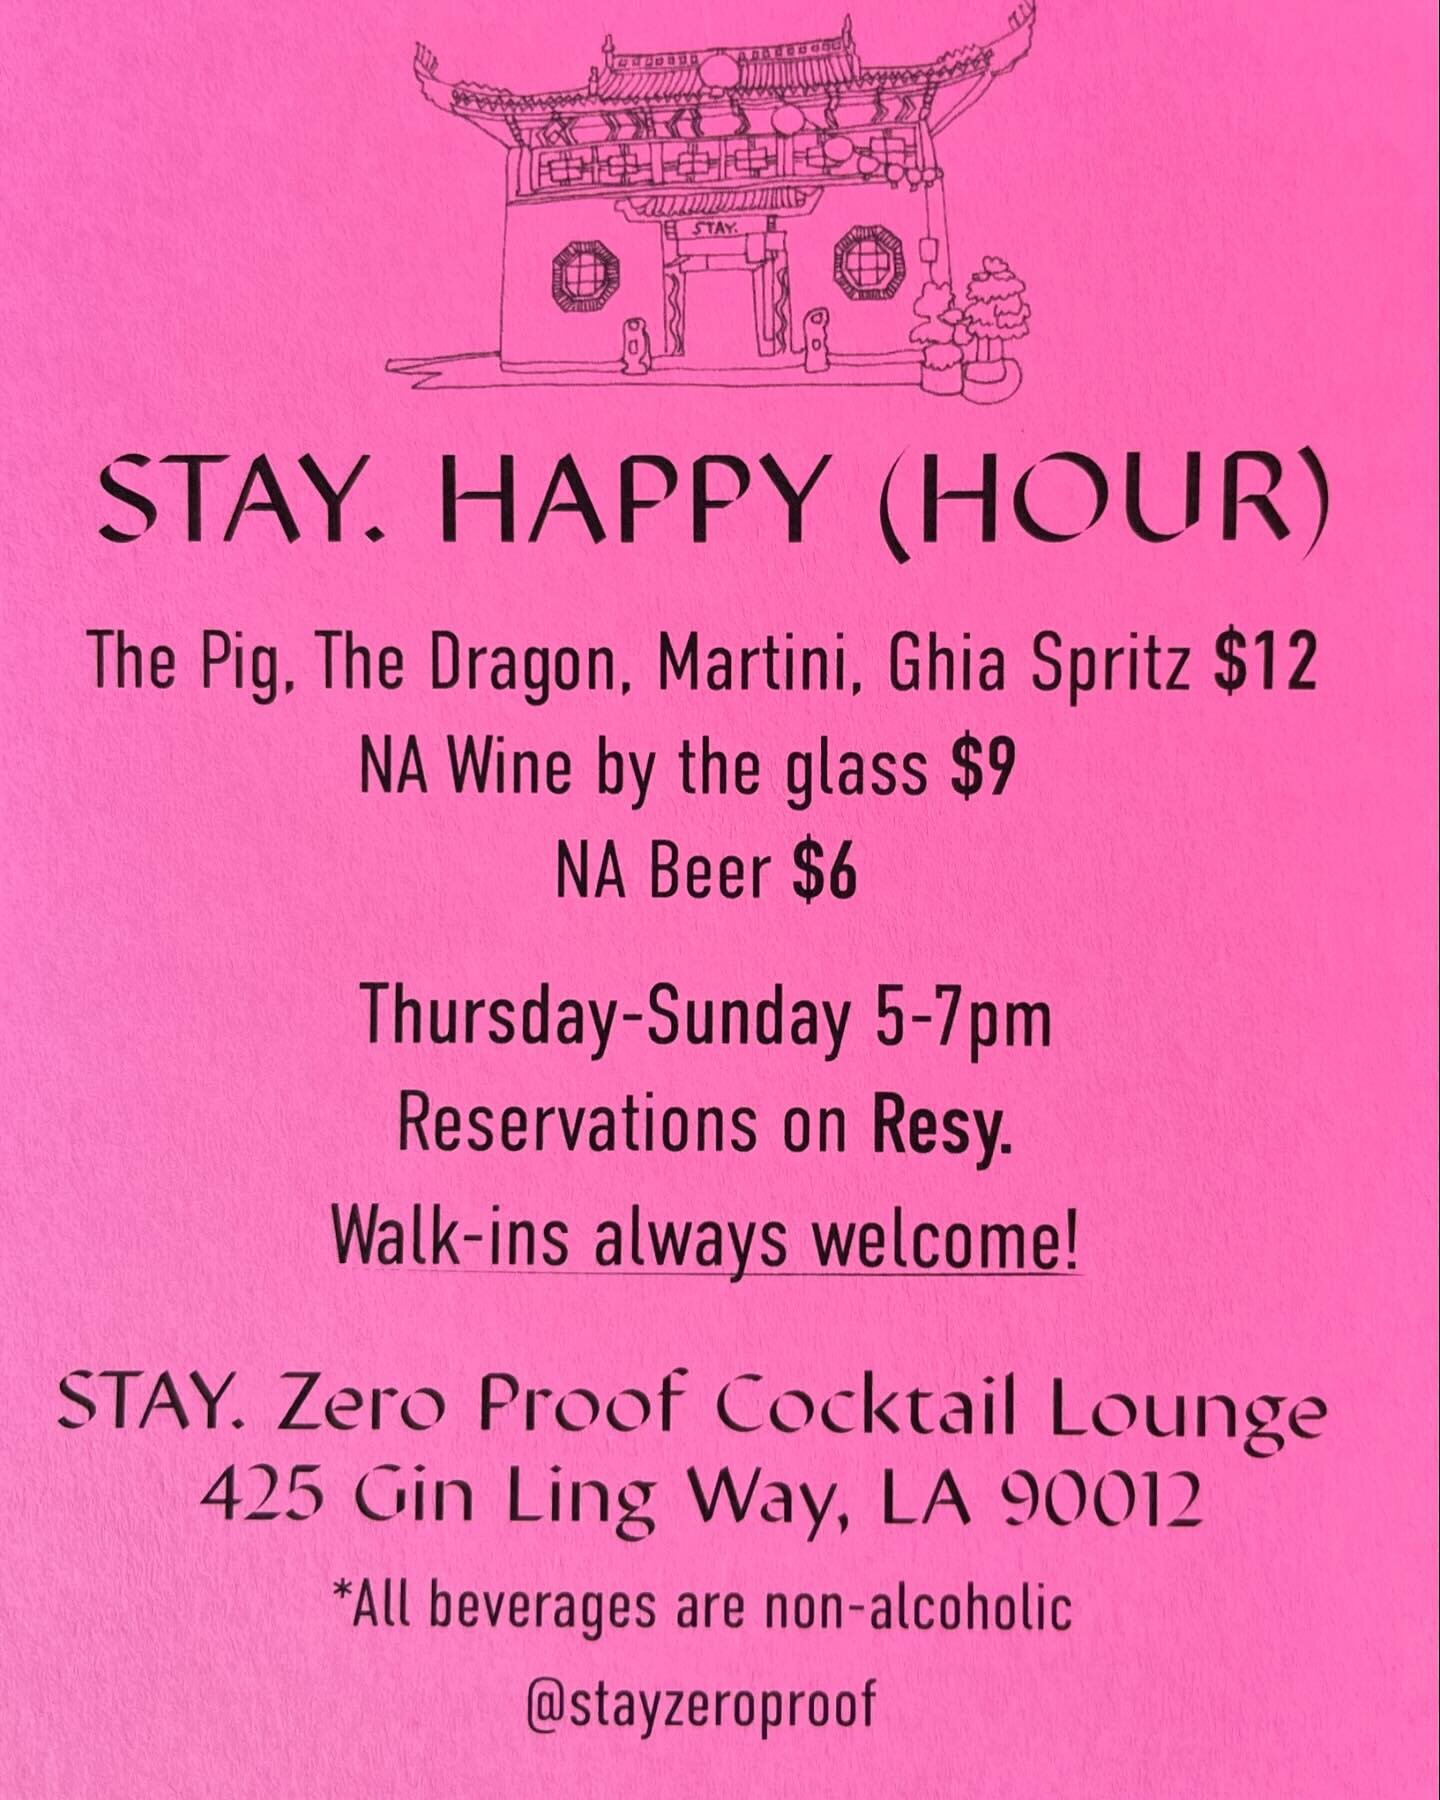 STAY. Happy (Hour)

Thursday-Sunday 5-7pm

Illustration by @romyohh
Flier by @aschphoenixdesign 

#happyhour #happy #trysomethingnew #joinus #zeroproof #nonalcoholic #nonalcoholicdrinks
#zeroproofcocktails #mindfuldrinking #craftcocktails #labars
#so